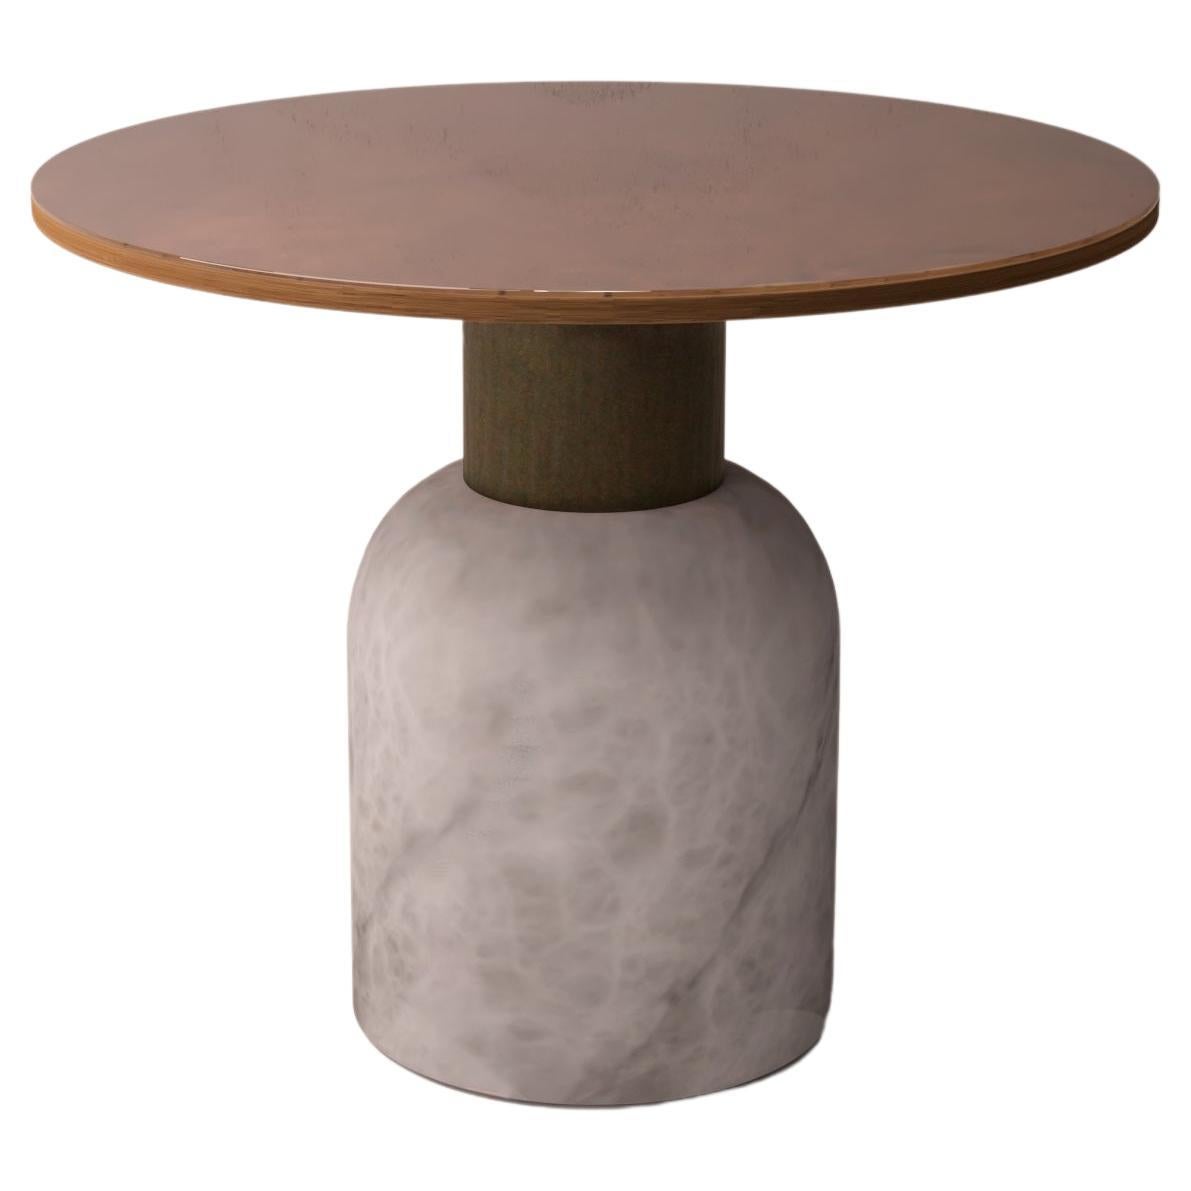 Serenity Fusion 40 Alabaster and Iroko Wood Table by Alabastro Italiano For Sale